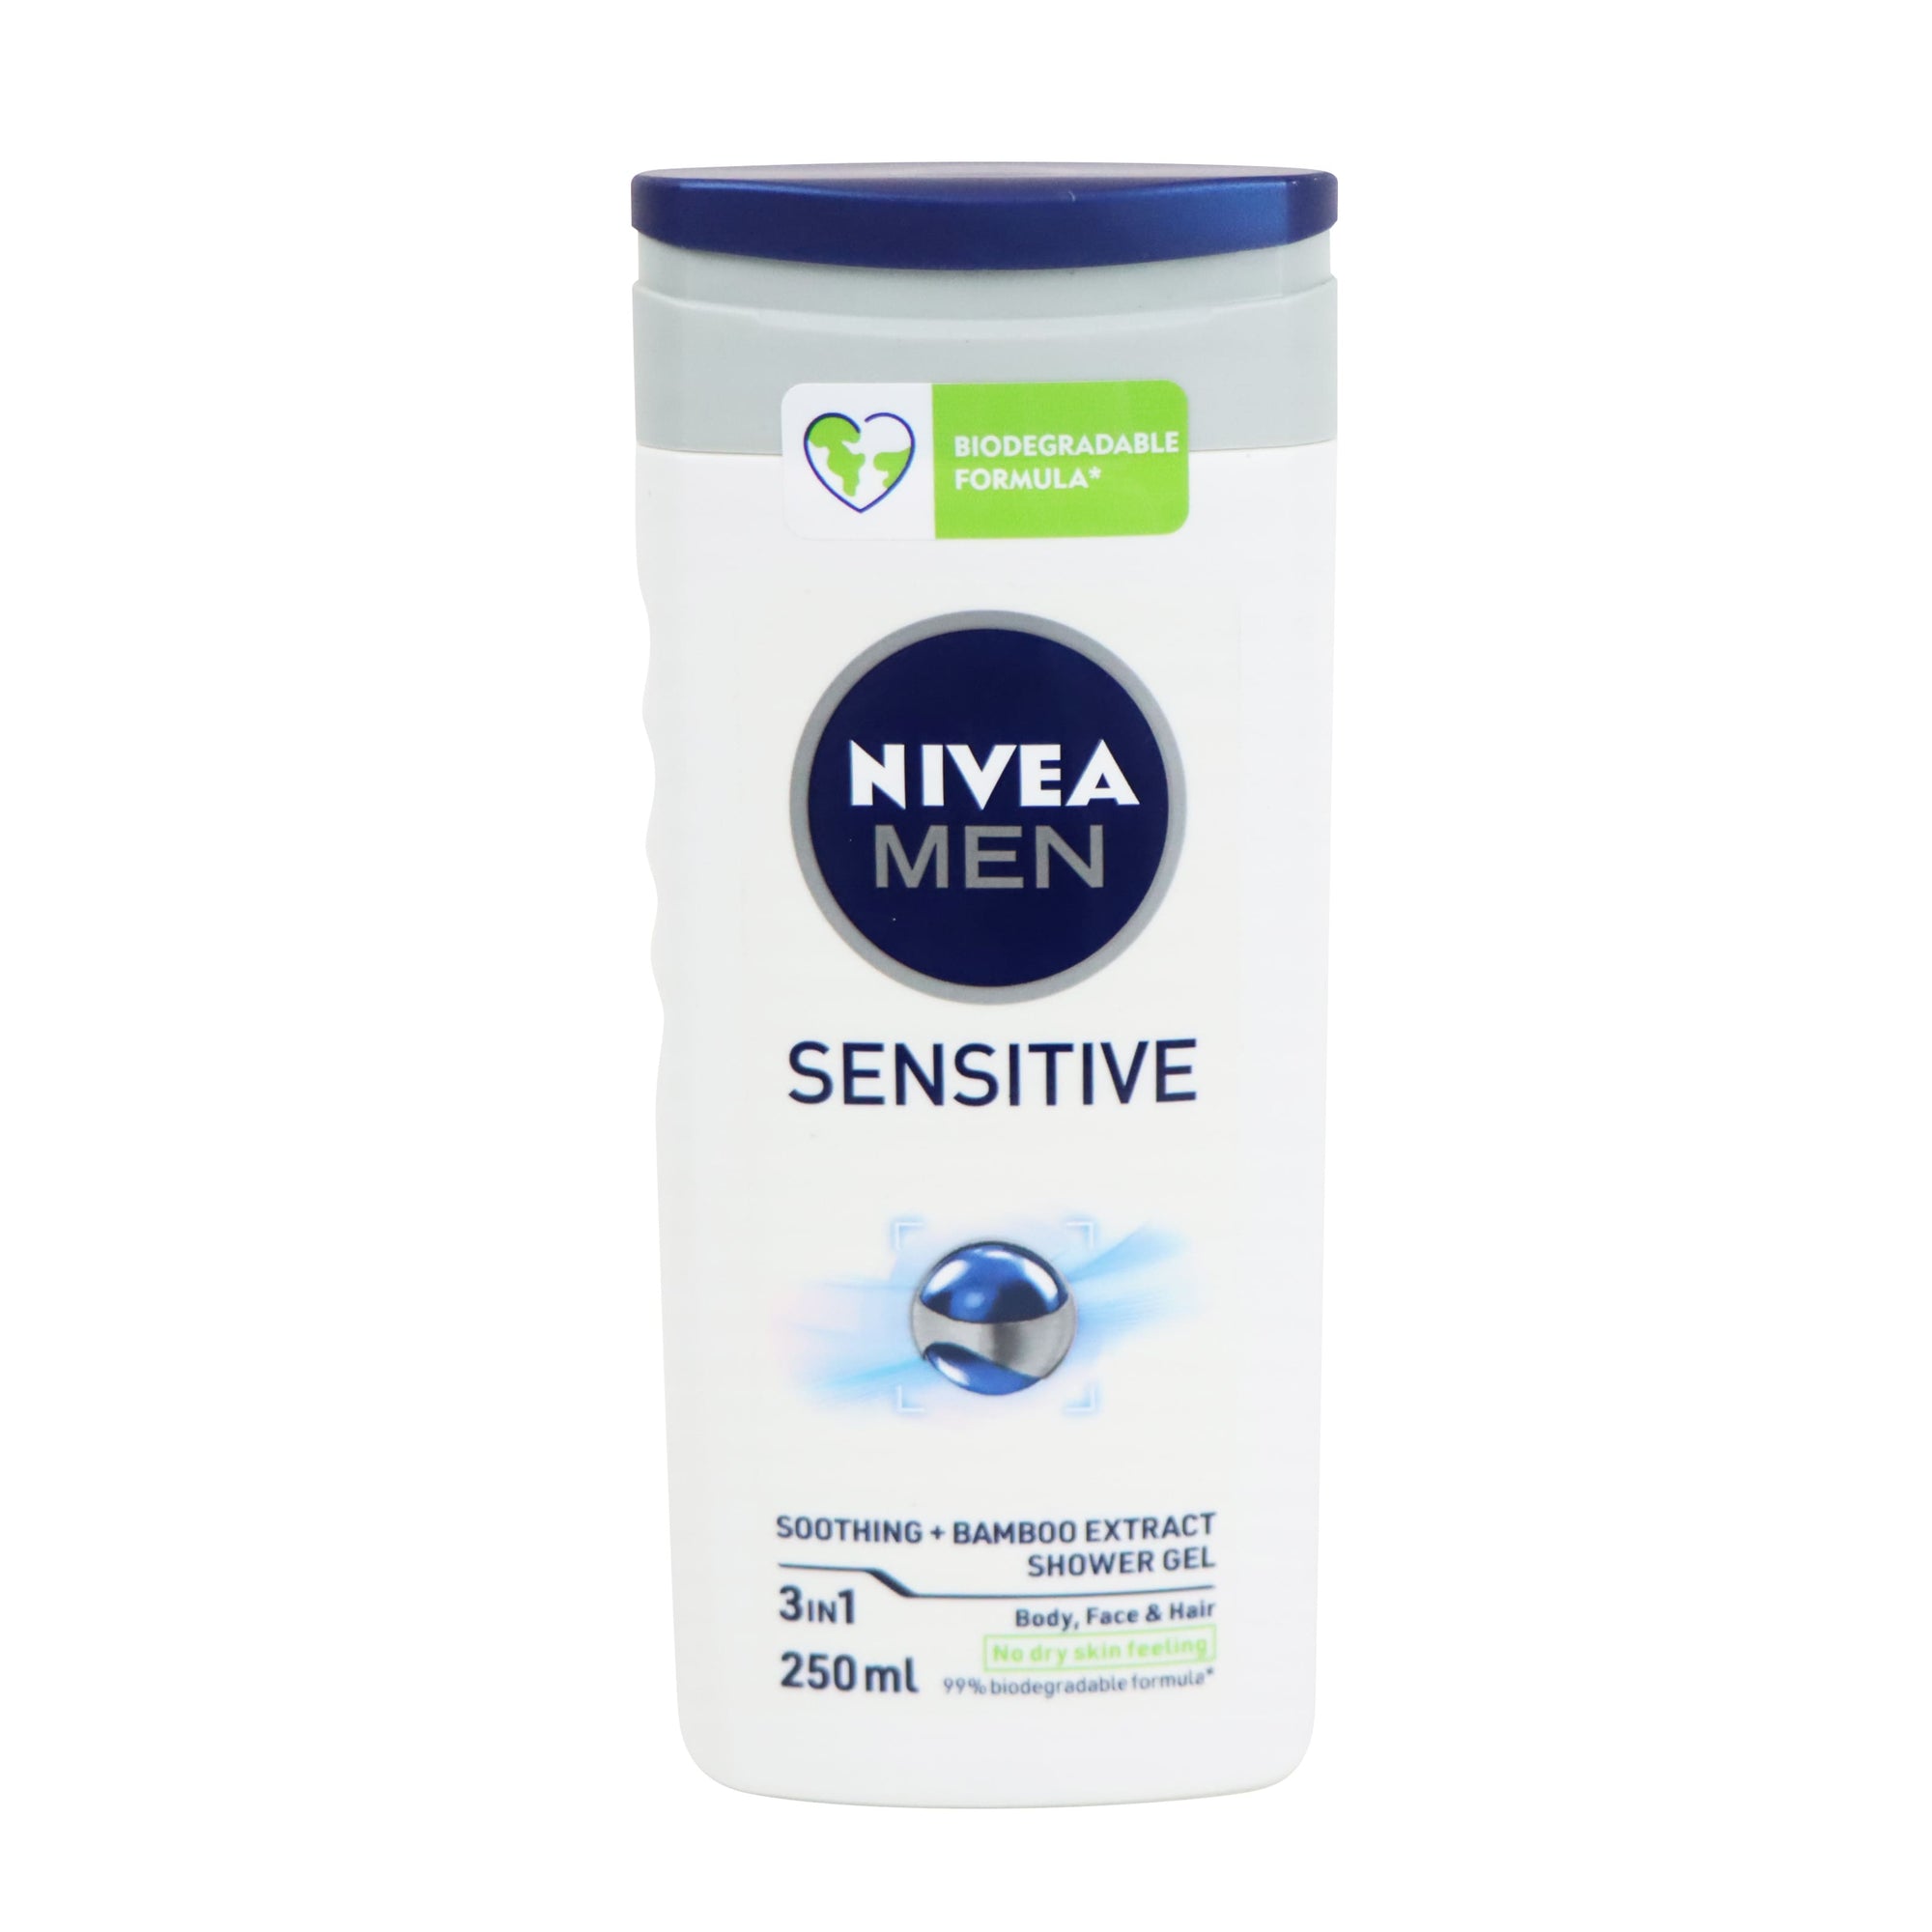 Nivea Men Sensitive 3-in-1 Shower Gel with Bamboo Extract 250ml